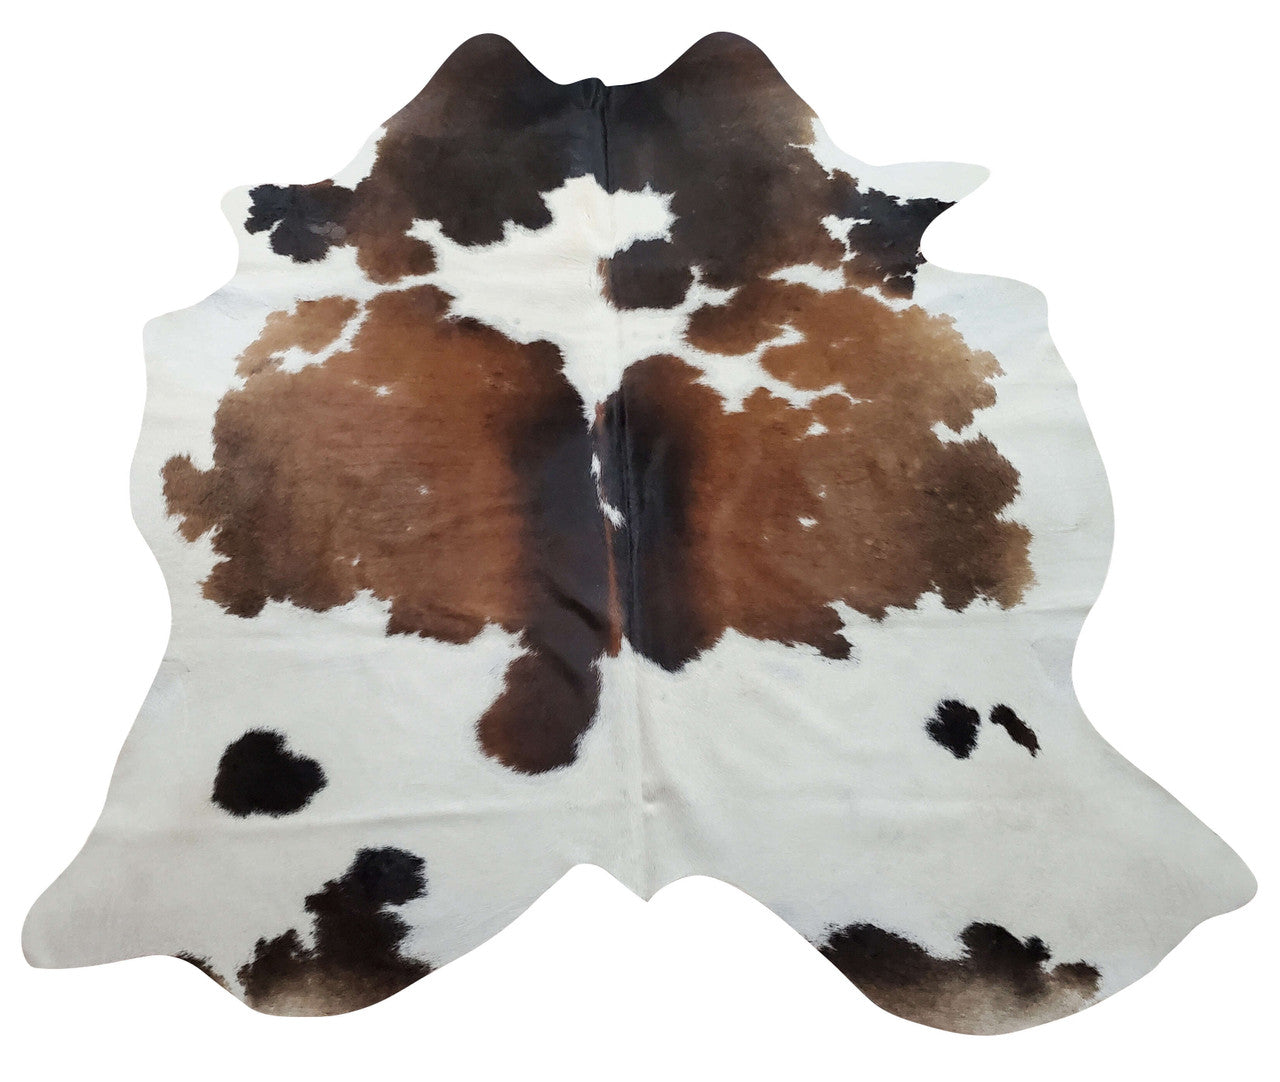 I love the beautiful new tricolor cowhide rug I bought! The piece is perfect and the colours are vibrant. My delivery arrived in under 2 days, which was very quick!
